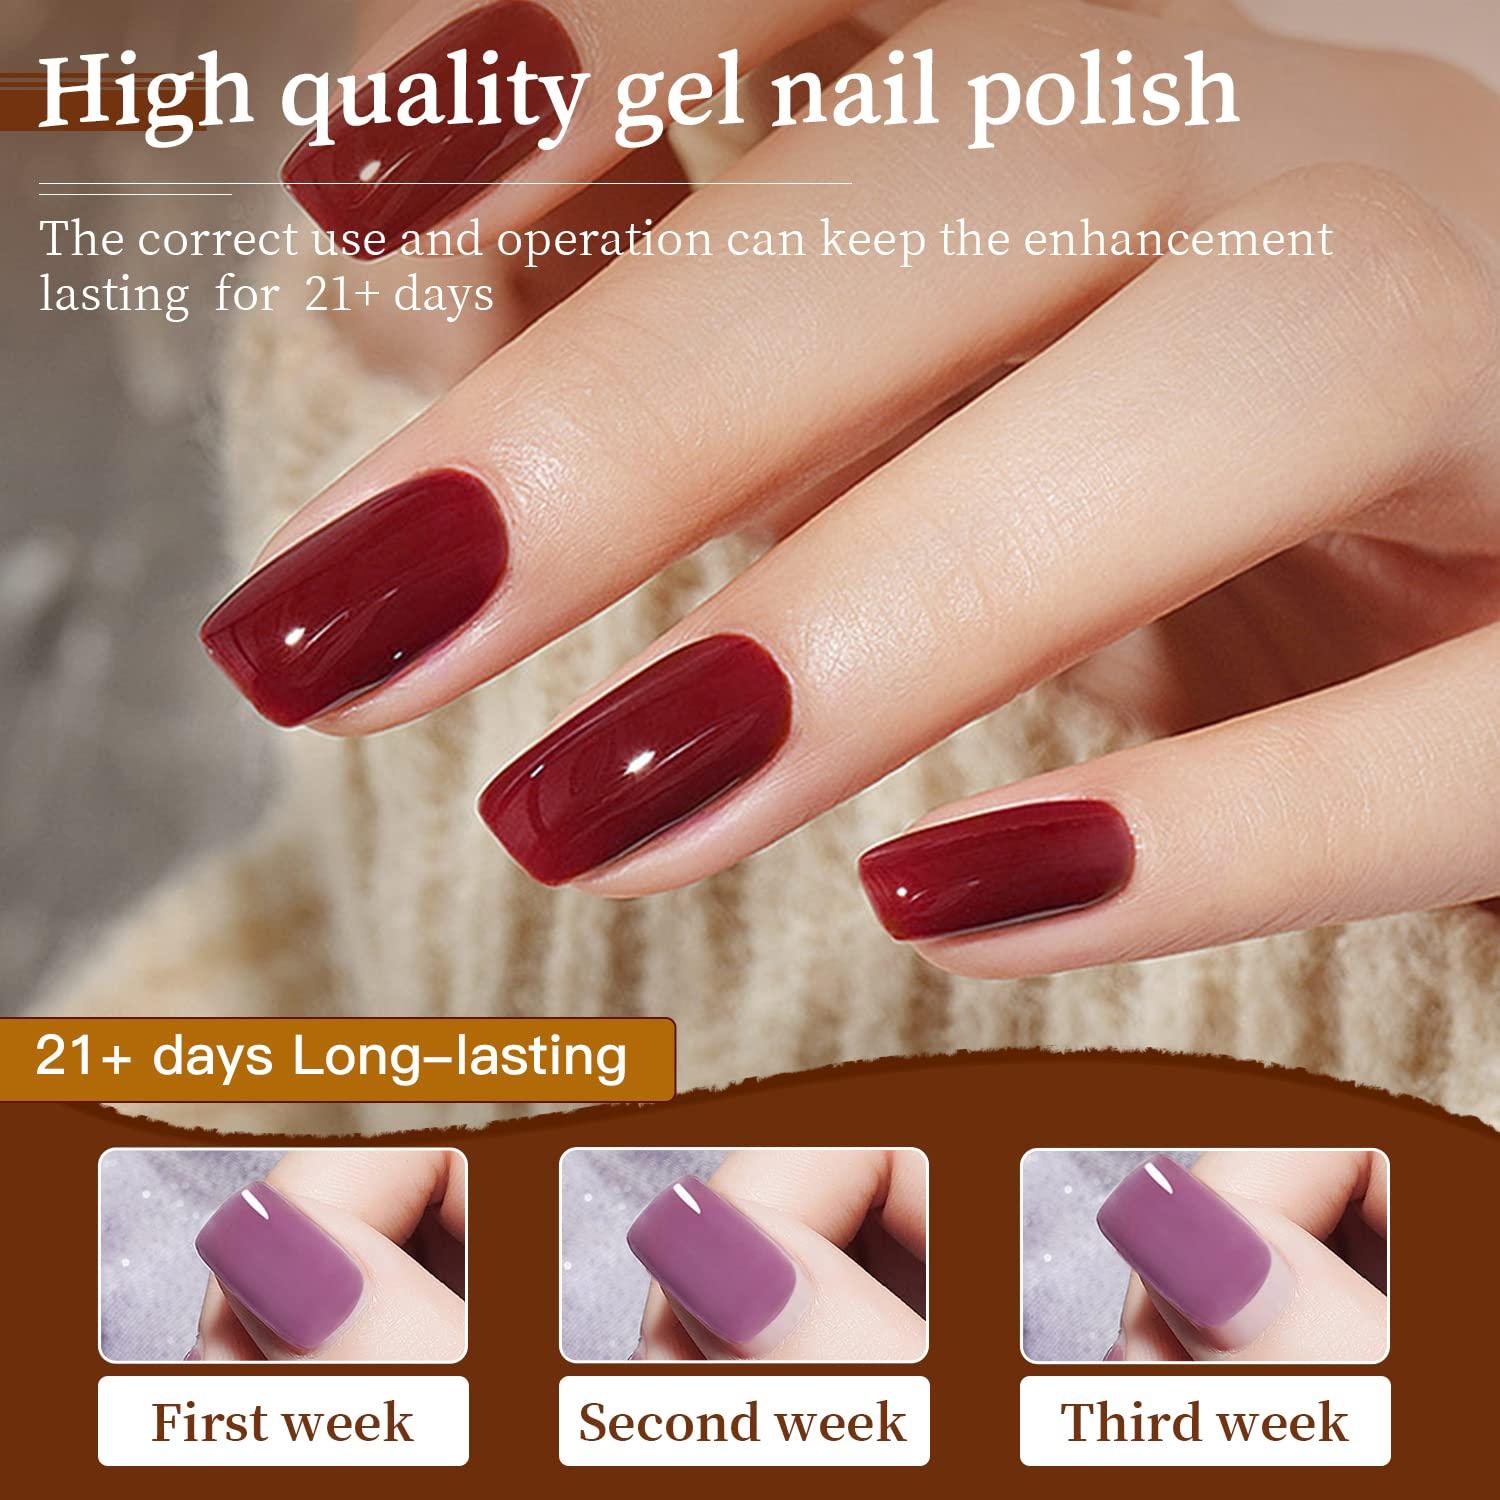 Buy Fope Quick Drying,Glossy Finish Nail Polish, Latest Shades Collection(Blue,  Golden, Silver, Blood Red, Old Brick, Beige, Dark pink) Set of 12, 72 ml (6  ml Each) Online at Low Prices in